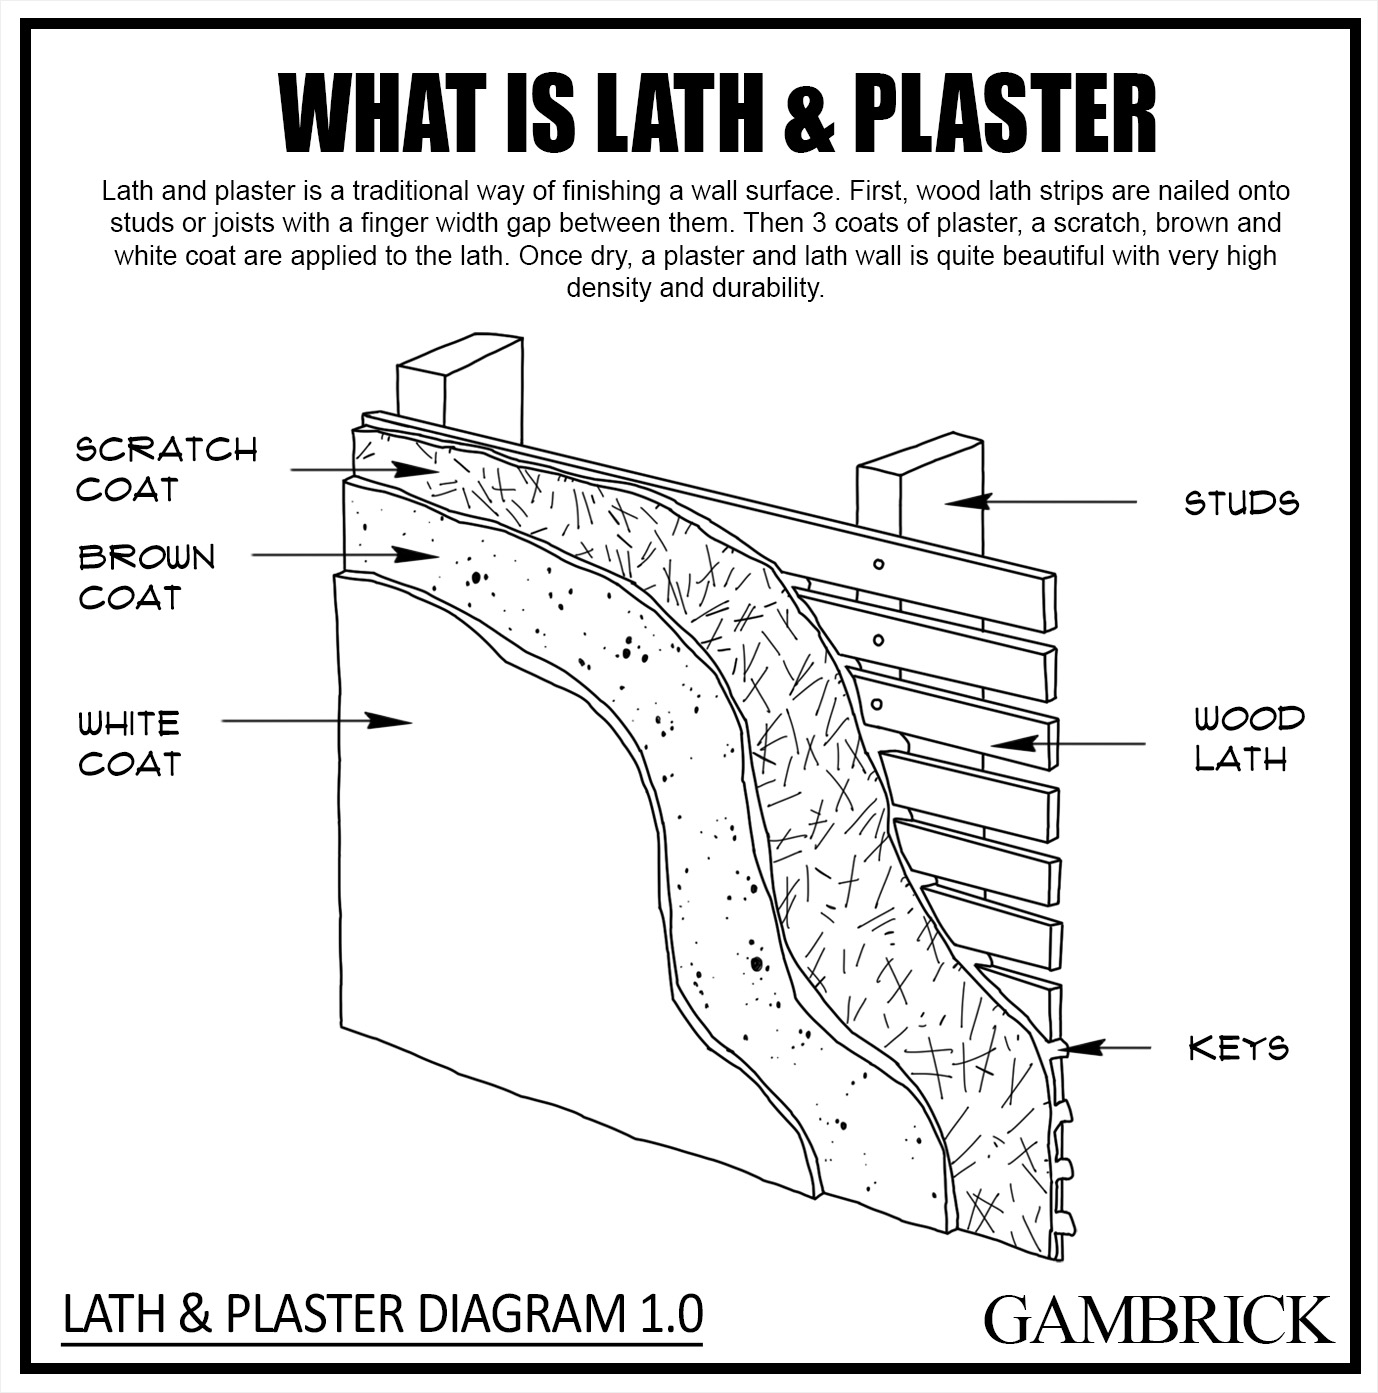 what is plaster and lath diagram 1.0